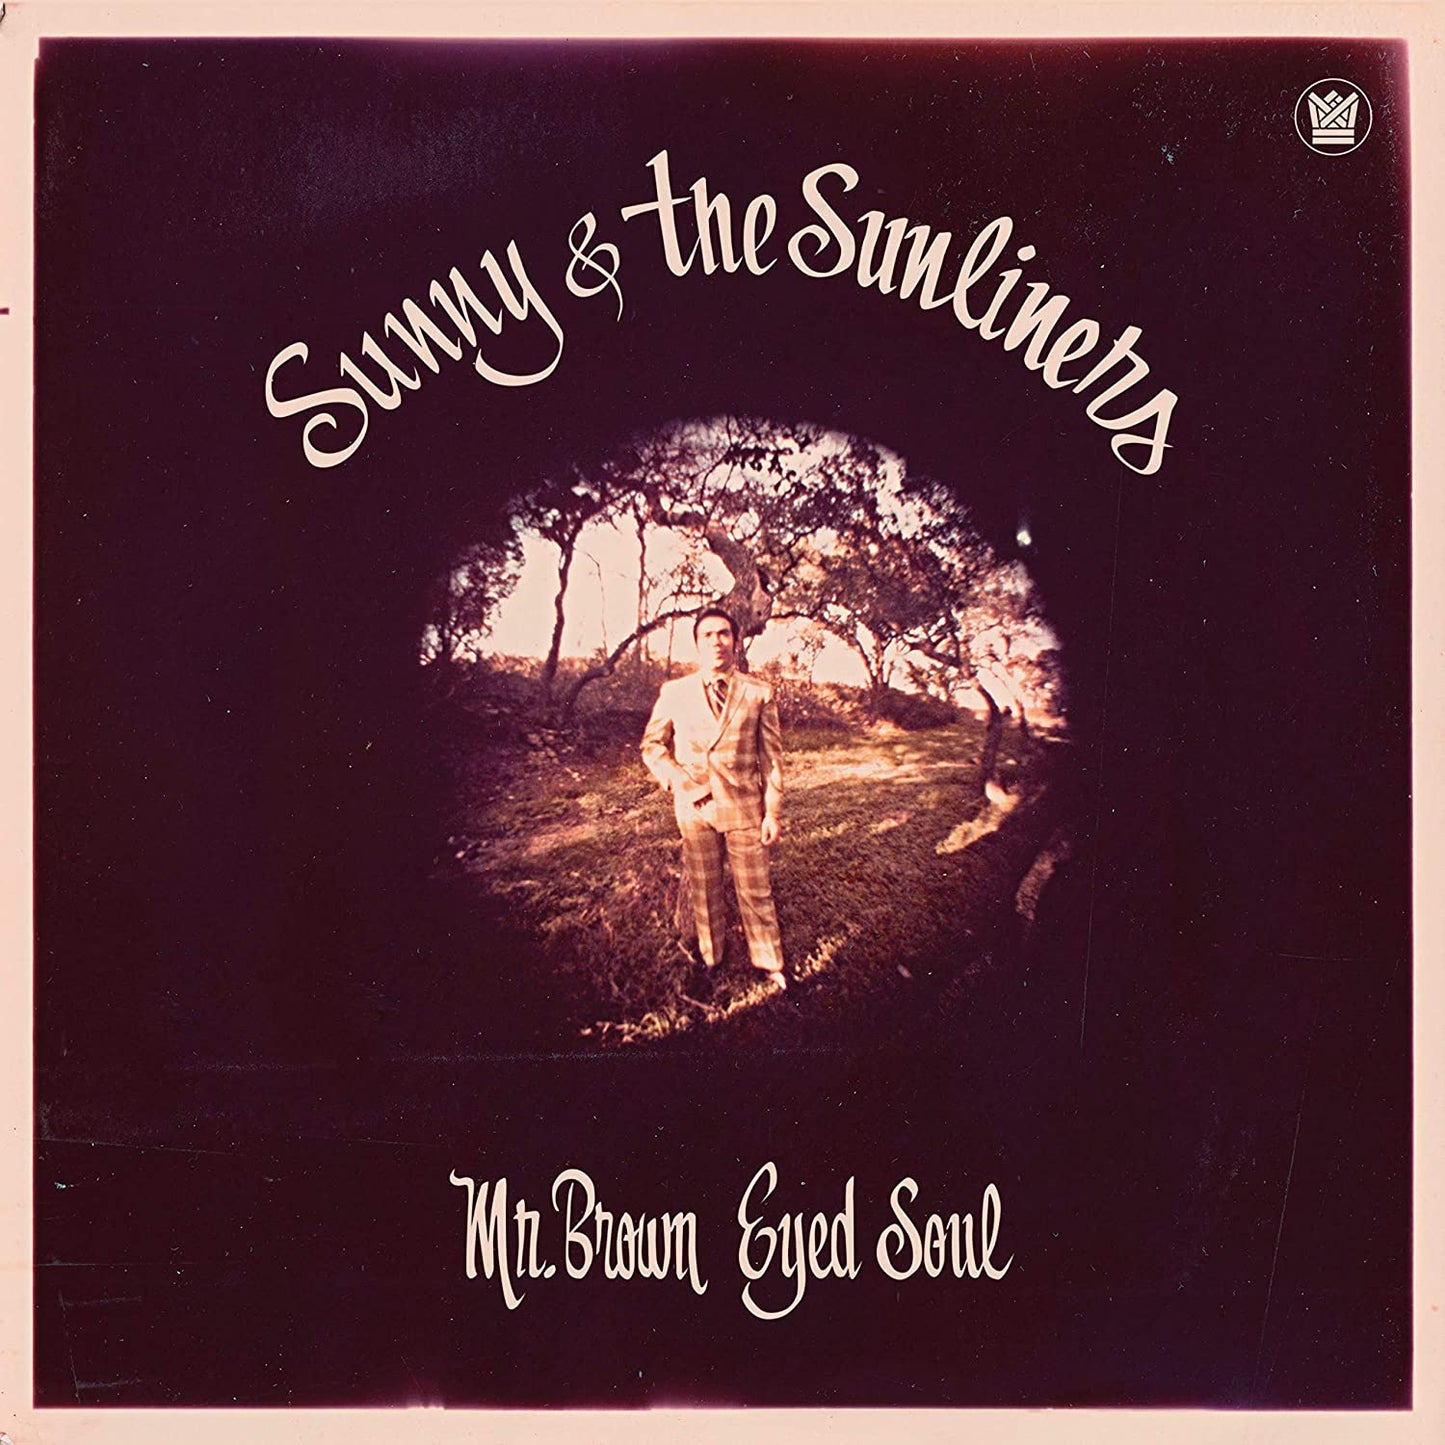 Sunny & The Sunliners - Mr. Brown Eyed Soul (Vinyl)